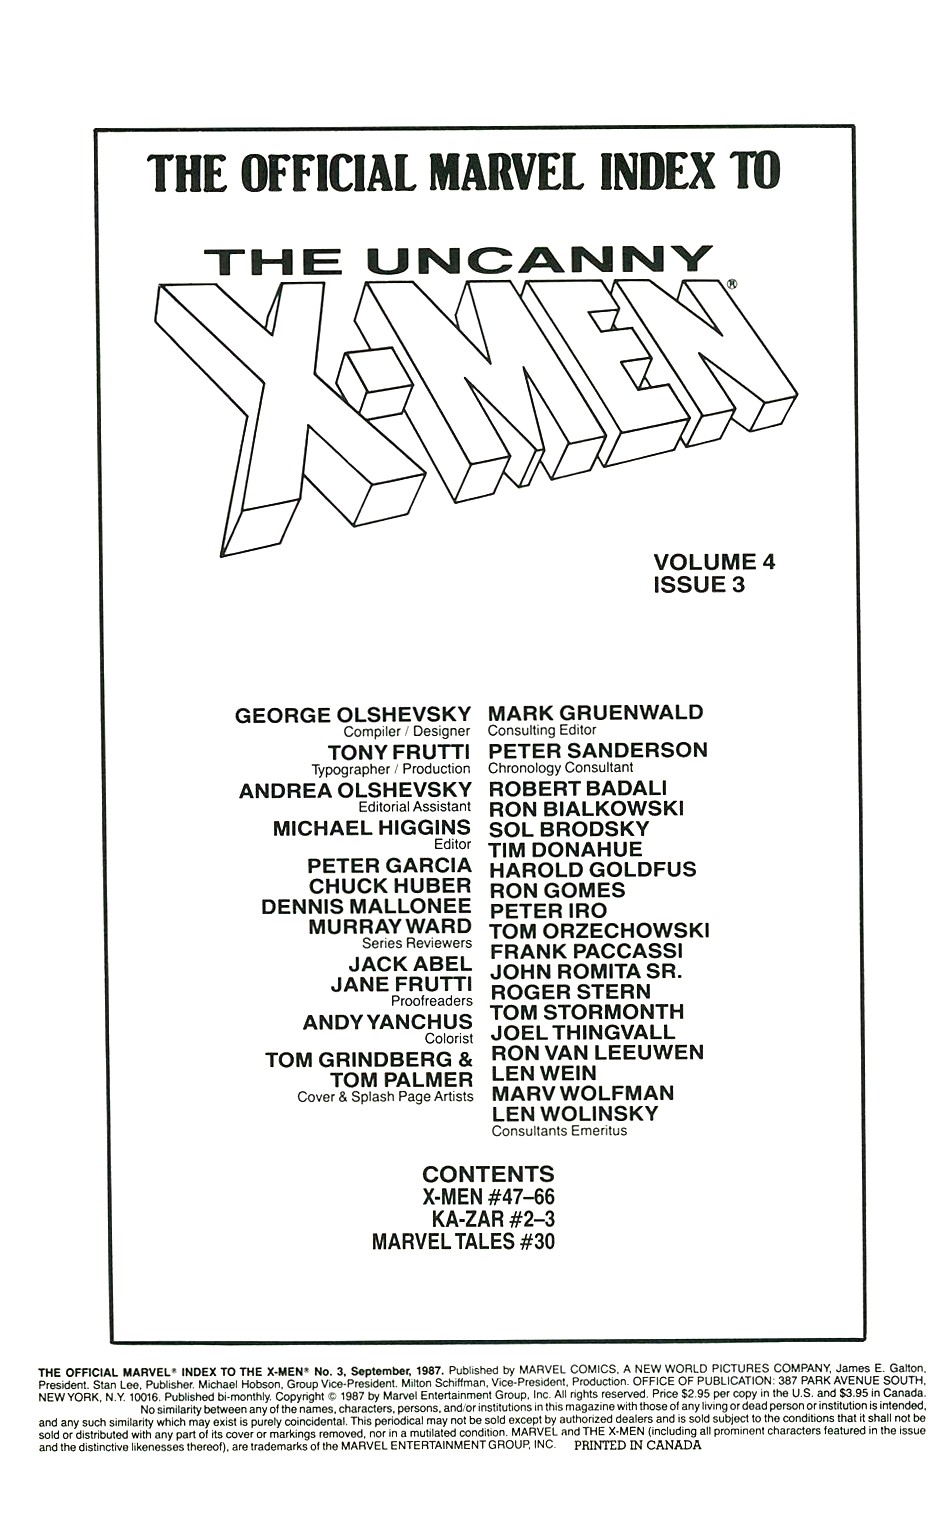 Read online The Official Marvel Index To The X-Men comic -  Issue #3 - 2